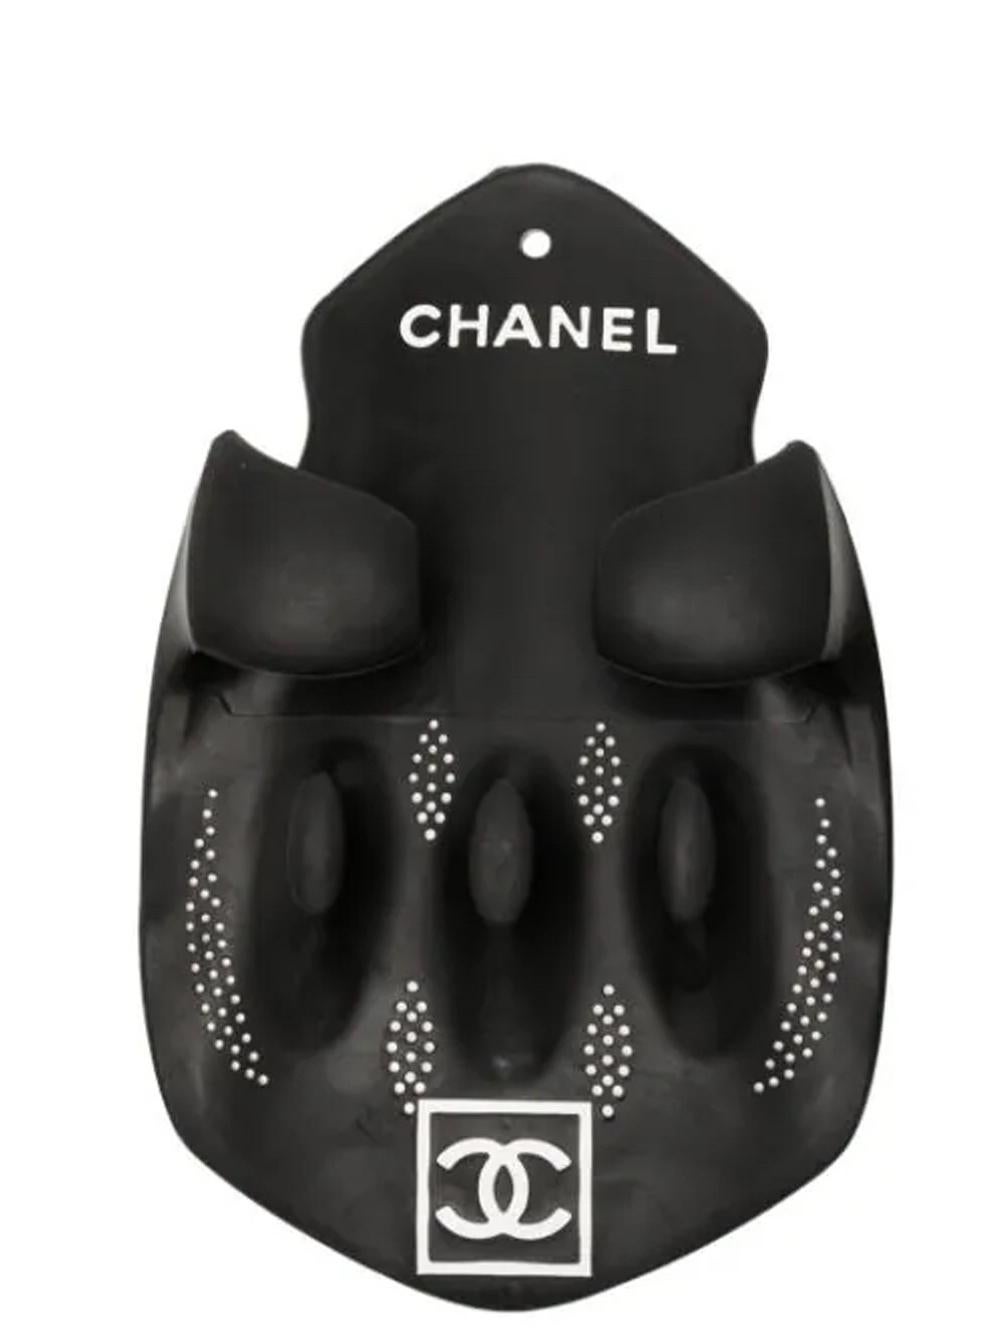 Black Chanel Limited Edition Swimming Peddlers